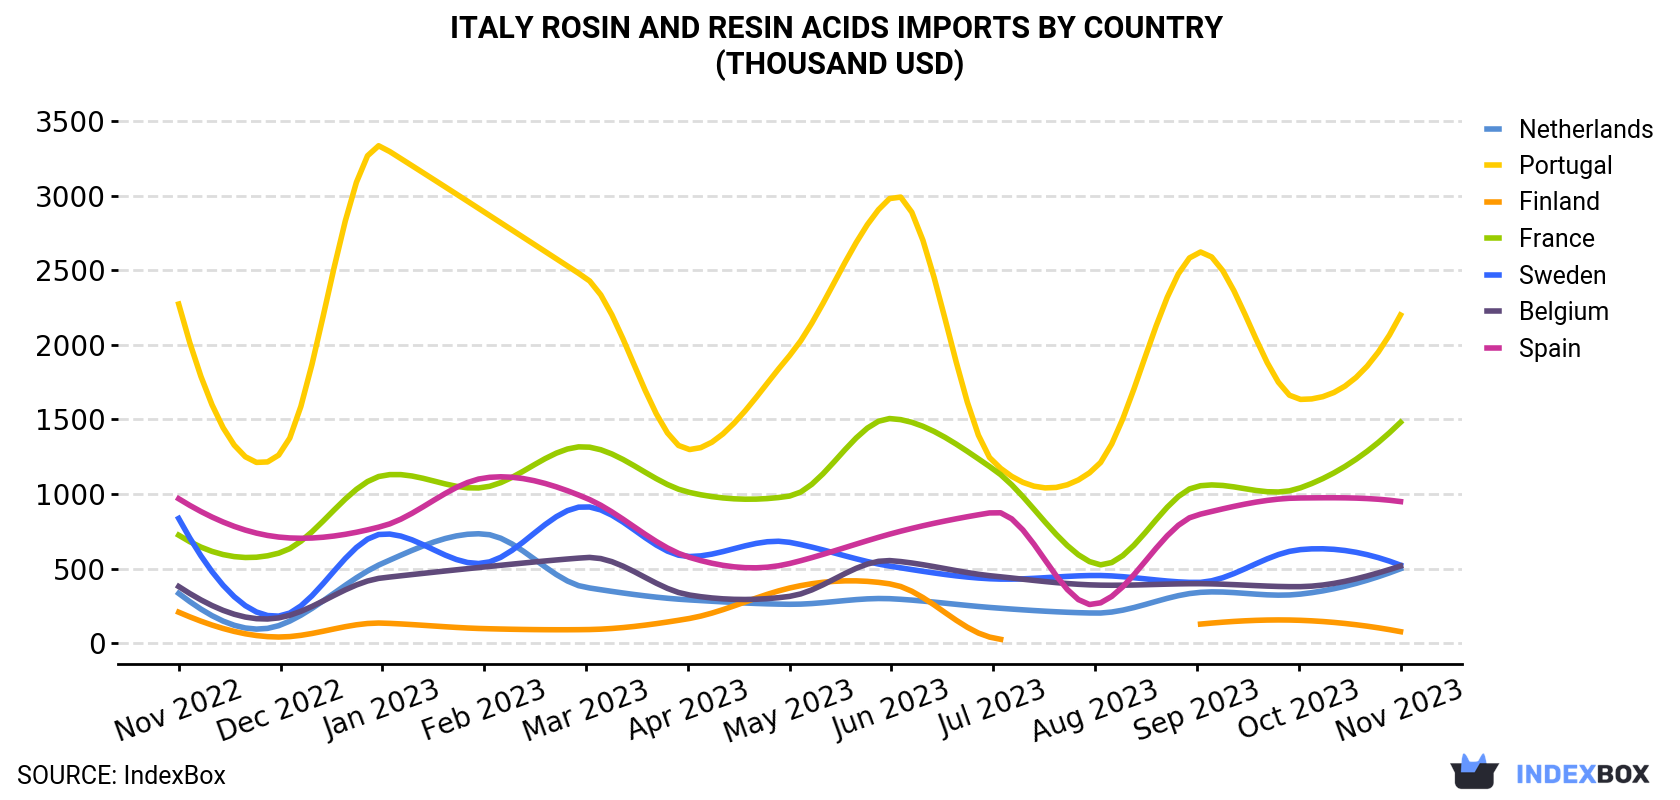 Italy Rosin And Resin Acids Imports By Country (Thousand USD)